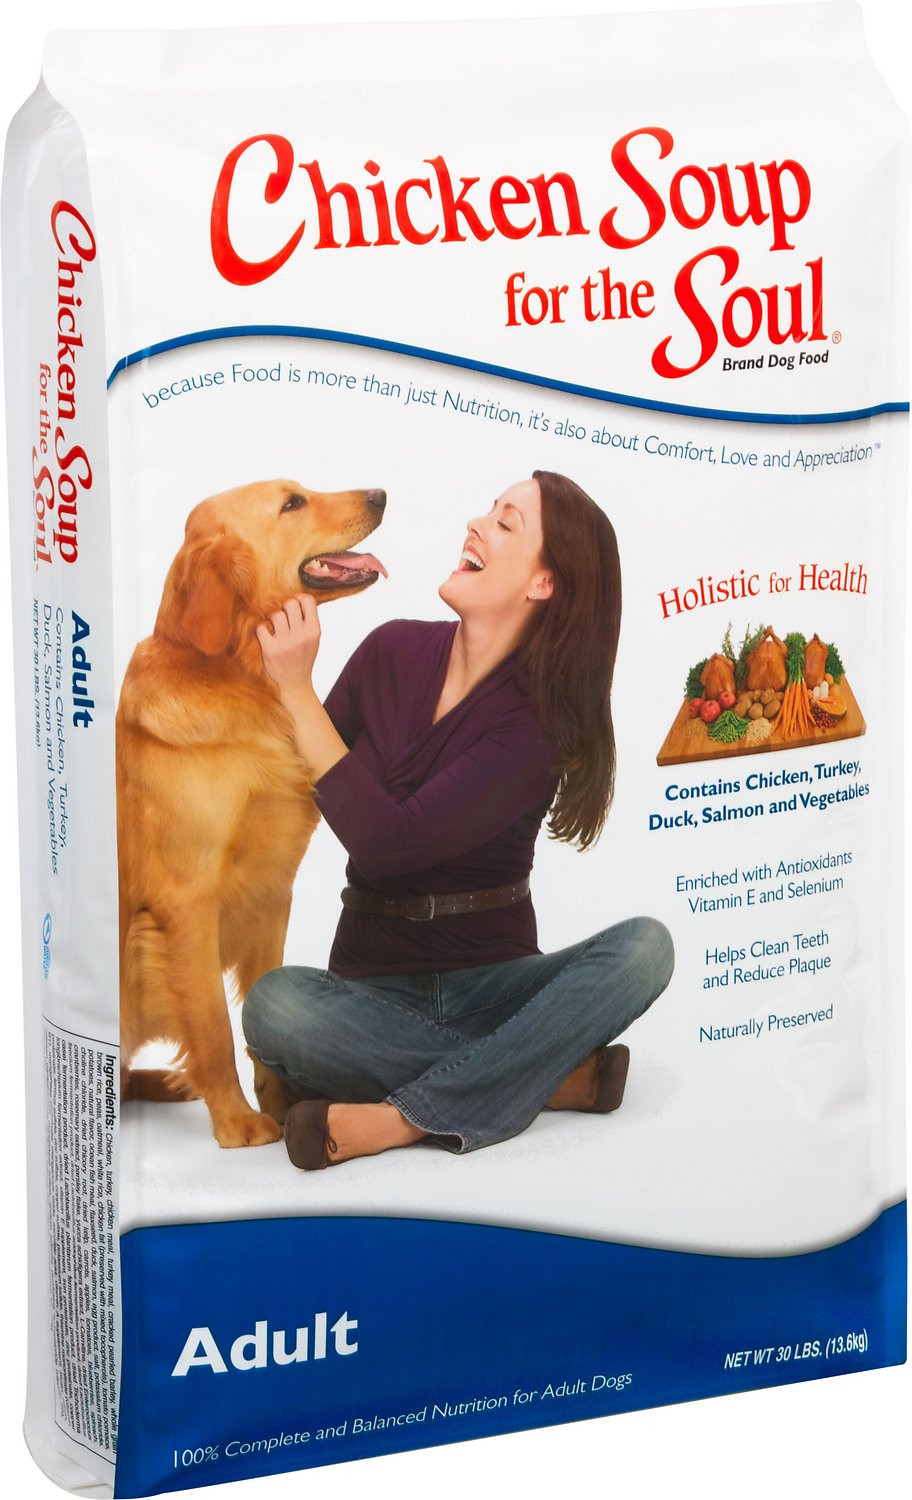 Chicken Soup Cat Food
 Chicken Soup for the Soul Adult Dry Dog Food 30 lb bag